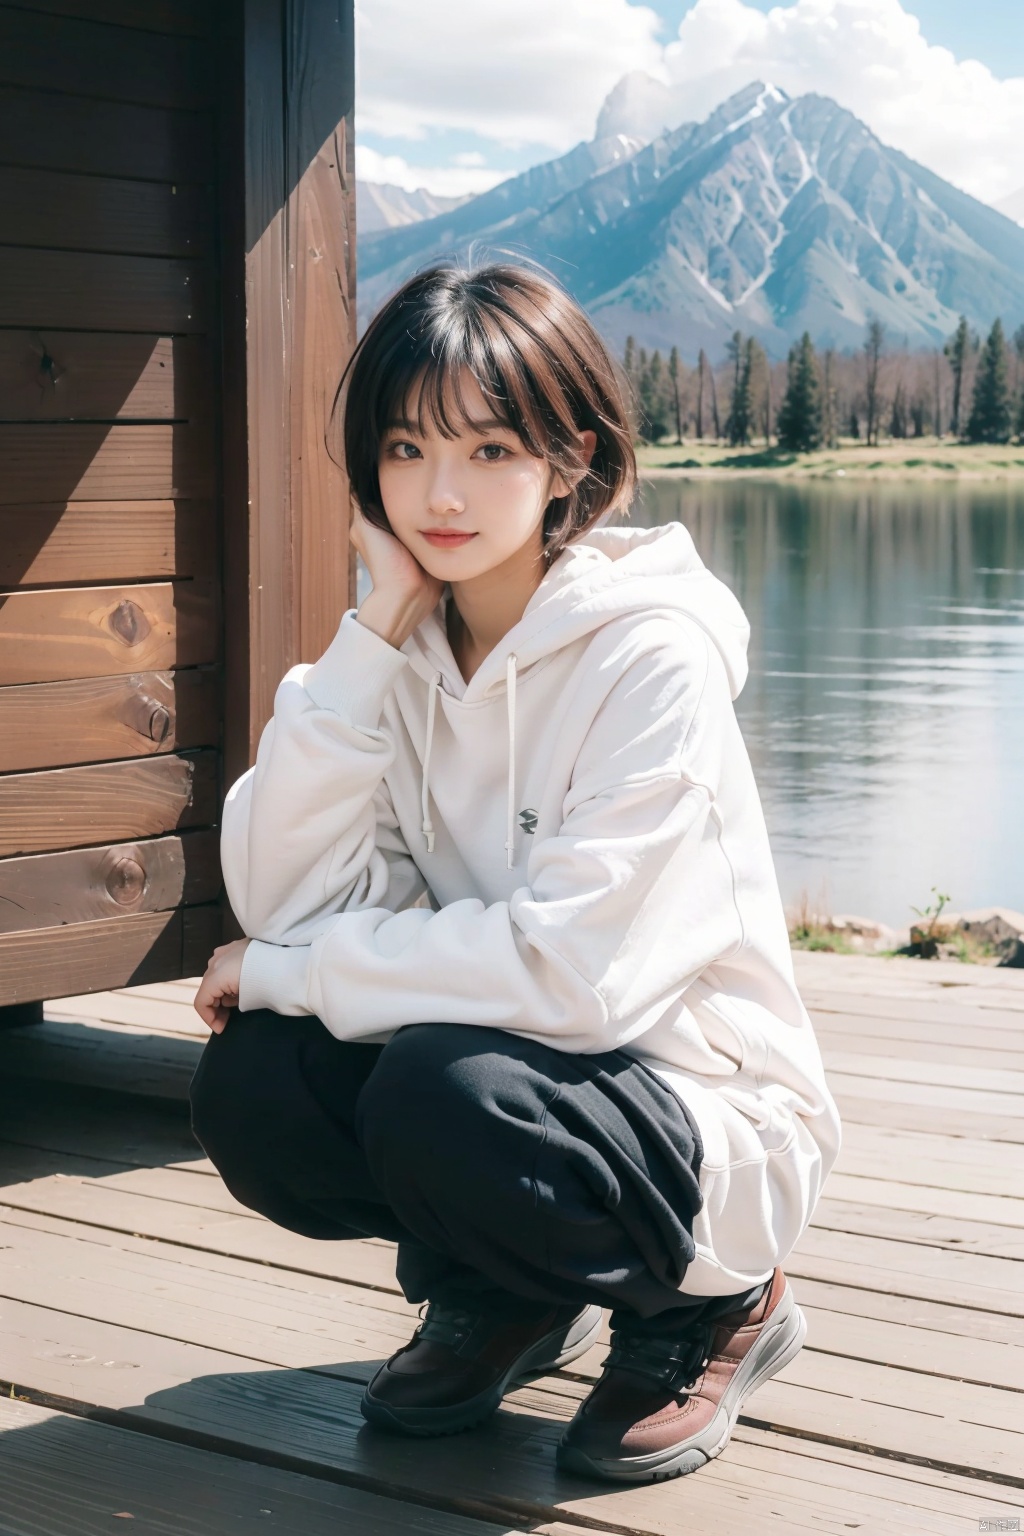 A girl squatting on the ground looked sideways at the camera, her eyes gentle and slightly shy.Her short hair with bangs is neat and neat, adding a bit of pure atmosphere.She wore light makeup on her face, highlighting the texture of her skin.She wore an off-white hooded sweatshirt, pink sweatpants, and white casual shoes. Her whole body was warm and energetic.Especially the pair of tight black legs paired with flesh-colored stockings, which looks even more warm and pleasant in the cold winter.The surrounding environment is very peaceful and beautiful: there are mountains in the distance, and the lake nearby reflects the clouds in the sky like a mirror.The whole picture is full of warm and harmonious atmosphere, making people feel the charm of nature and the beauty of life.